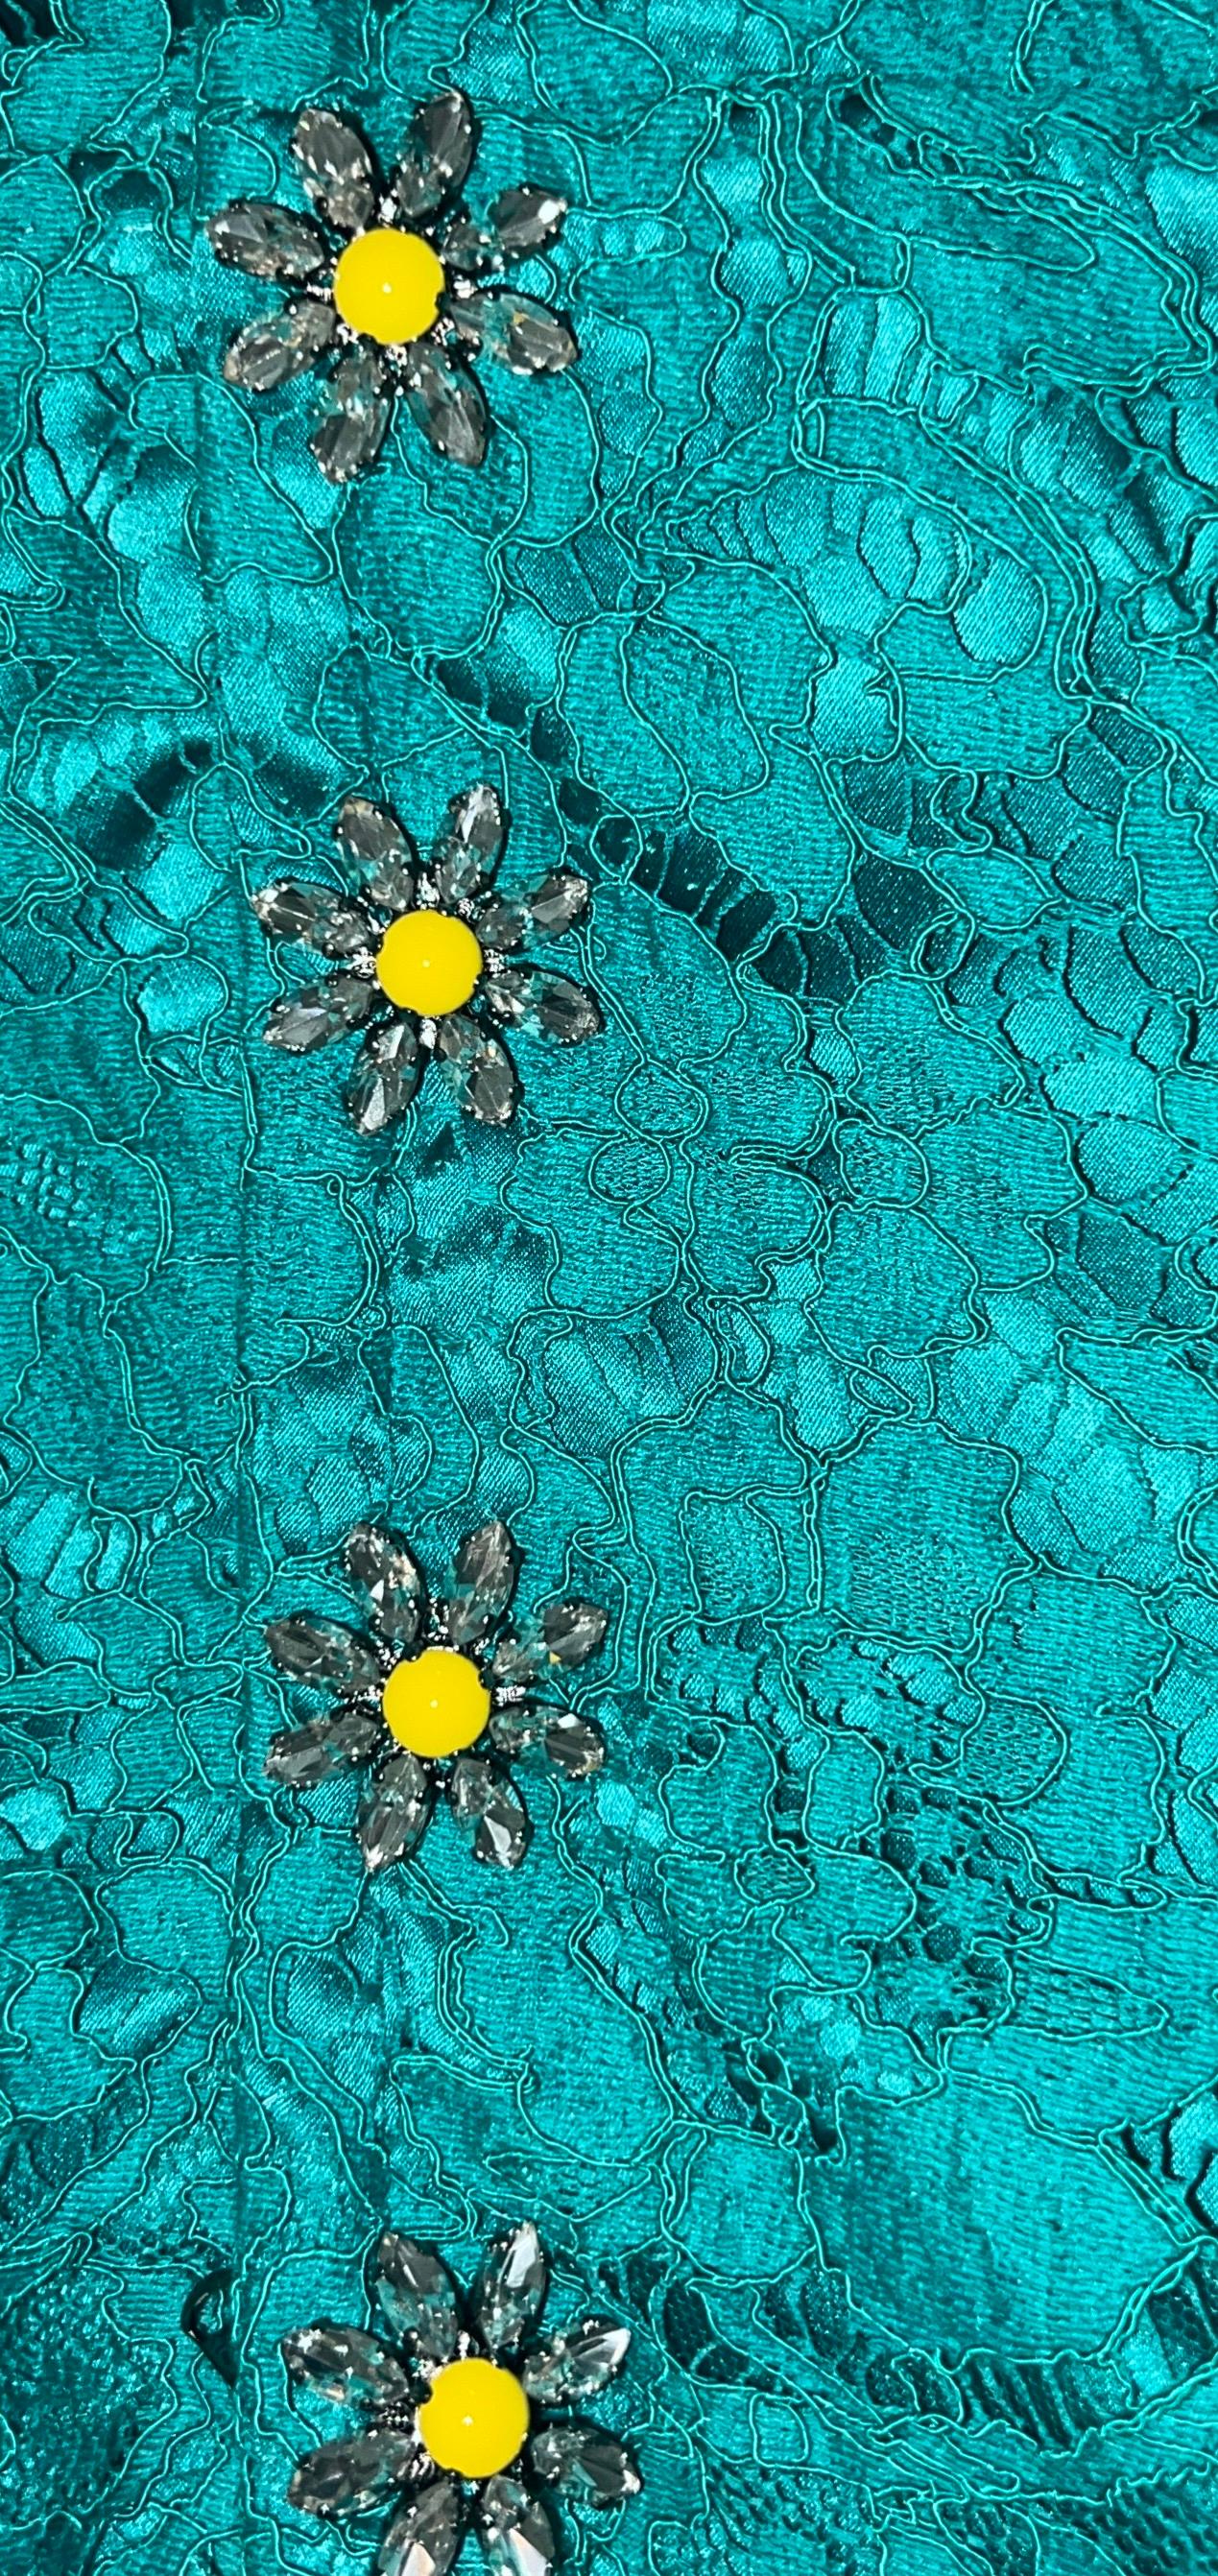 NEW Dolce & Gabbana Turquoise Aqua Lace Crystal Floral Buttons Shift Dress 40 For Sale 1